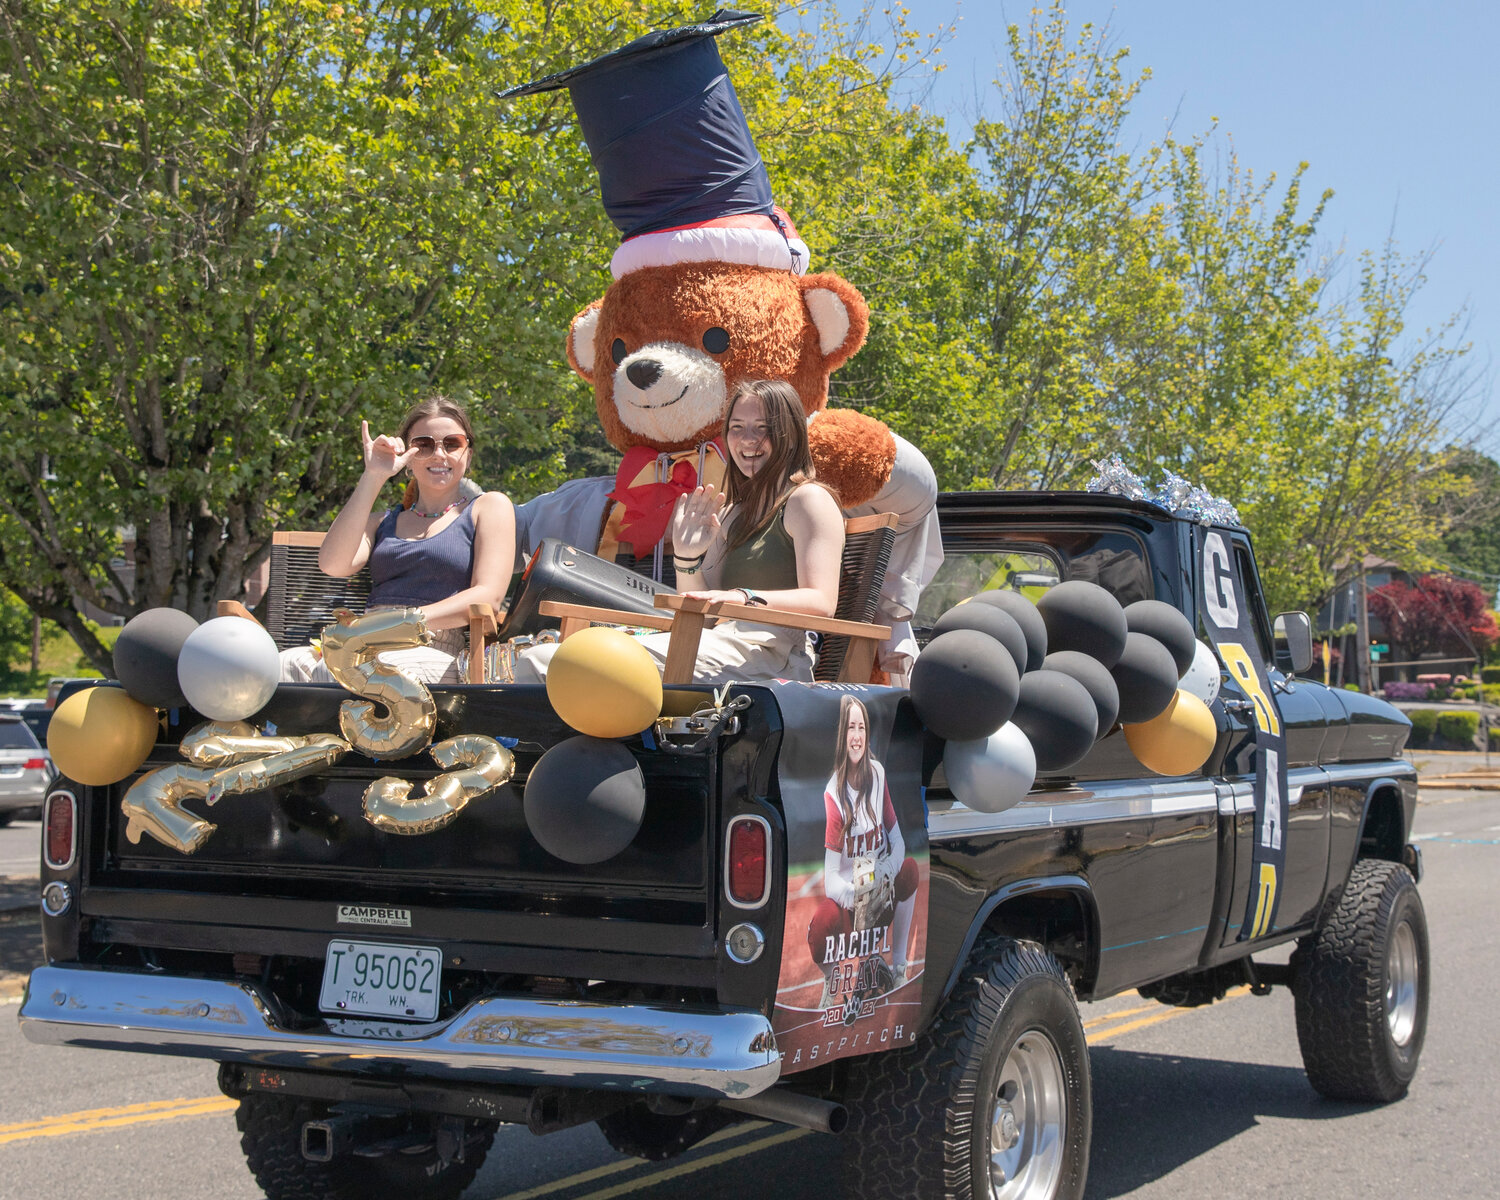 W.F. West High School senior Rachel Gray smiles and waves in front of a giant bear figure sporting a graduation cap during a parade in Chehalis on Sunday, June 4.